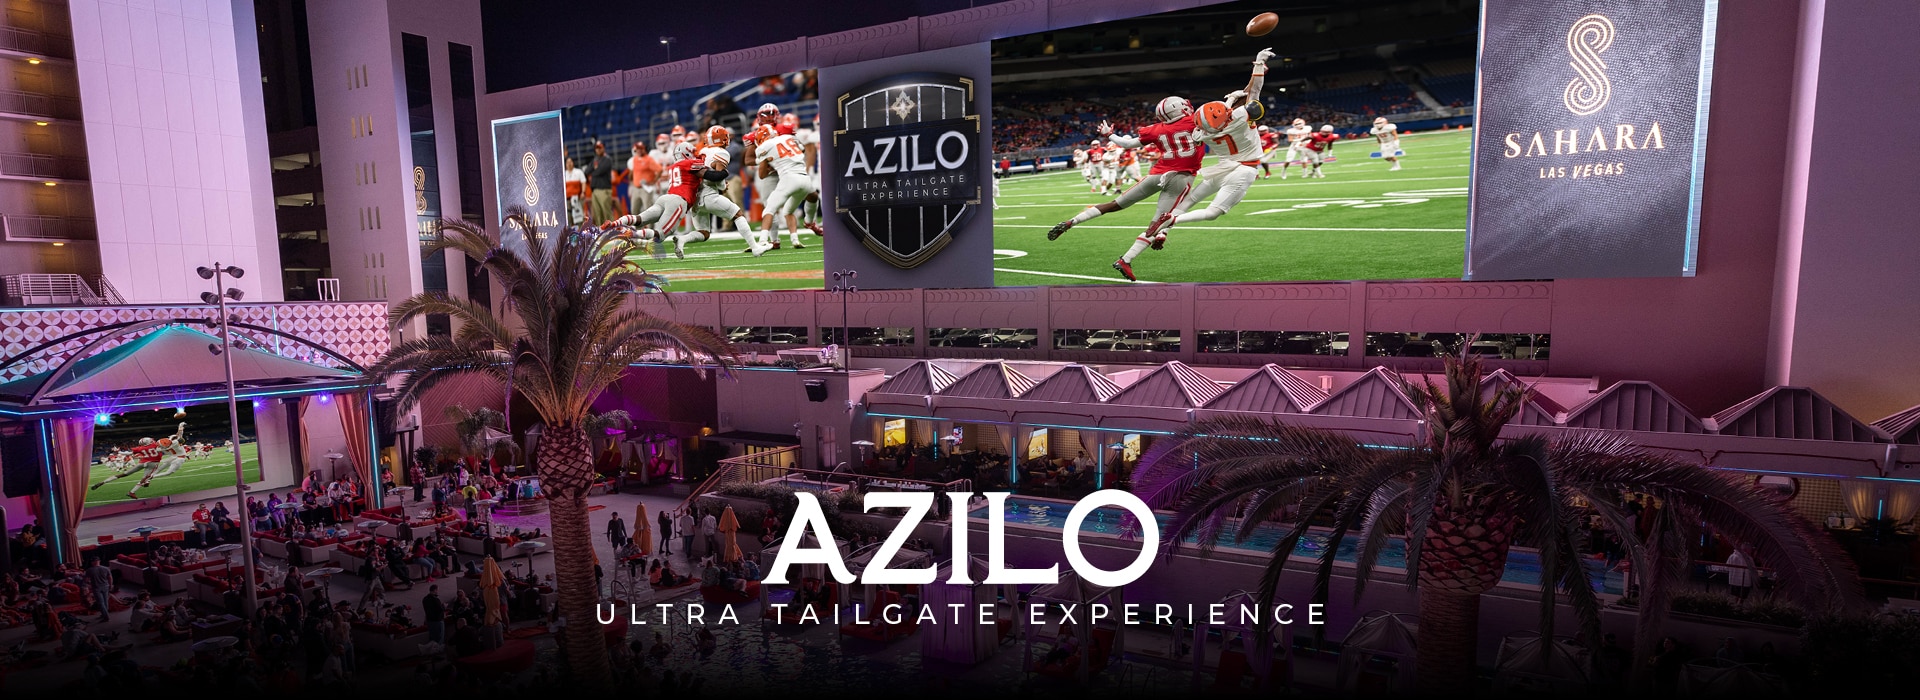 04134_ENT_AziloUltraPool_TailgateExperience_082022_WebEmailSocial_v3_General_1920x700